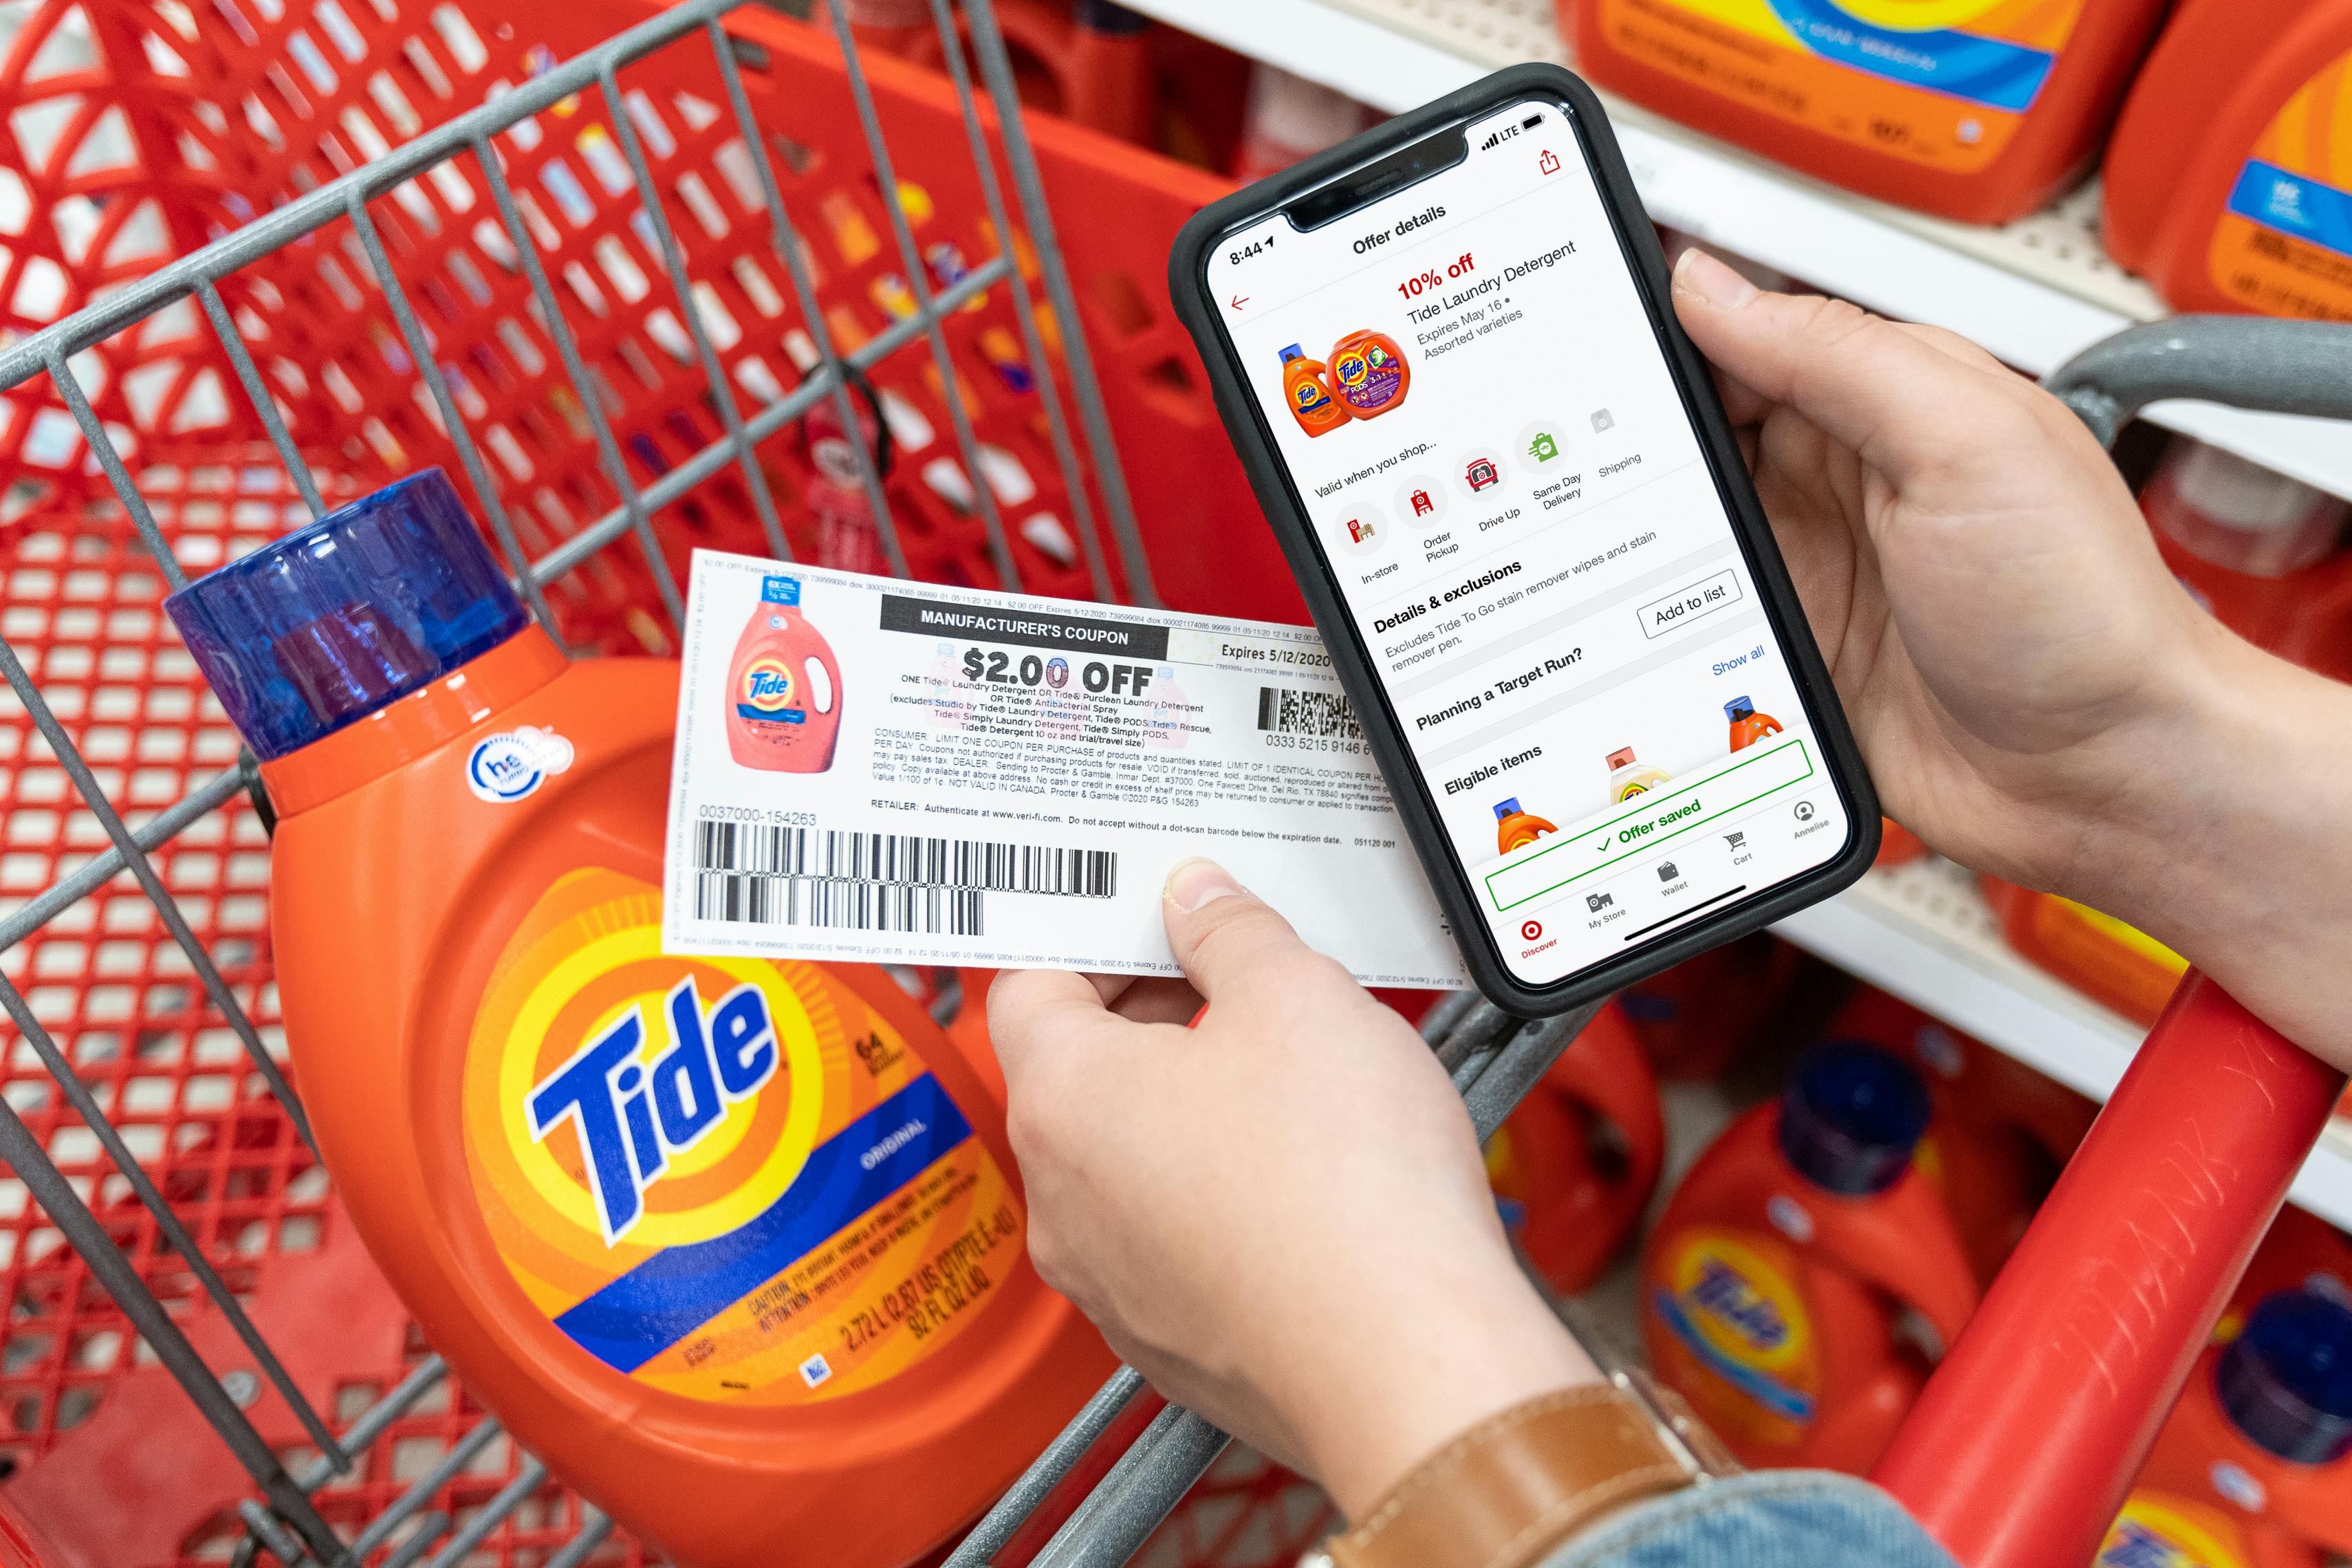 9 Things You Need To Know About Using Digital Coupons The Krazy Coupon Lady